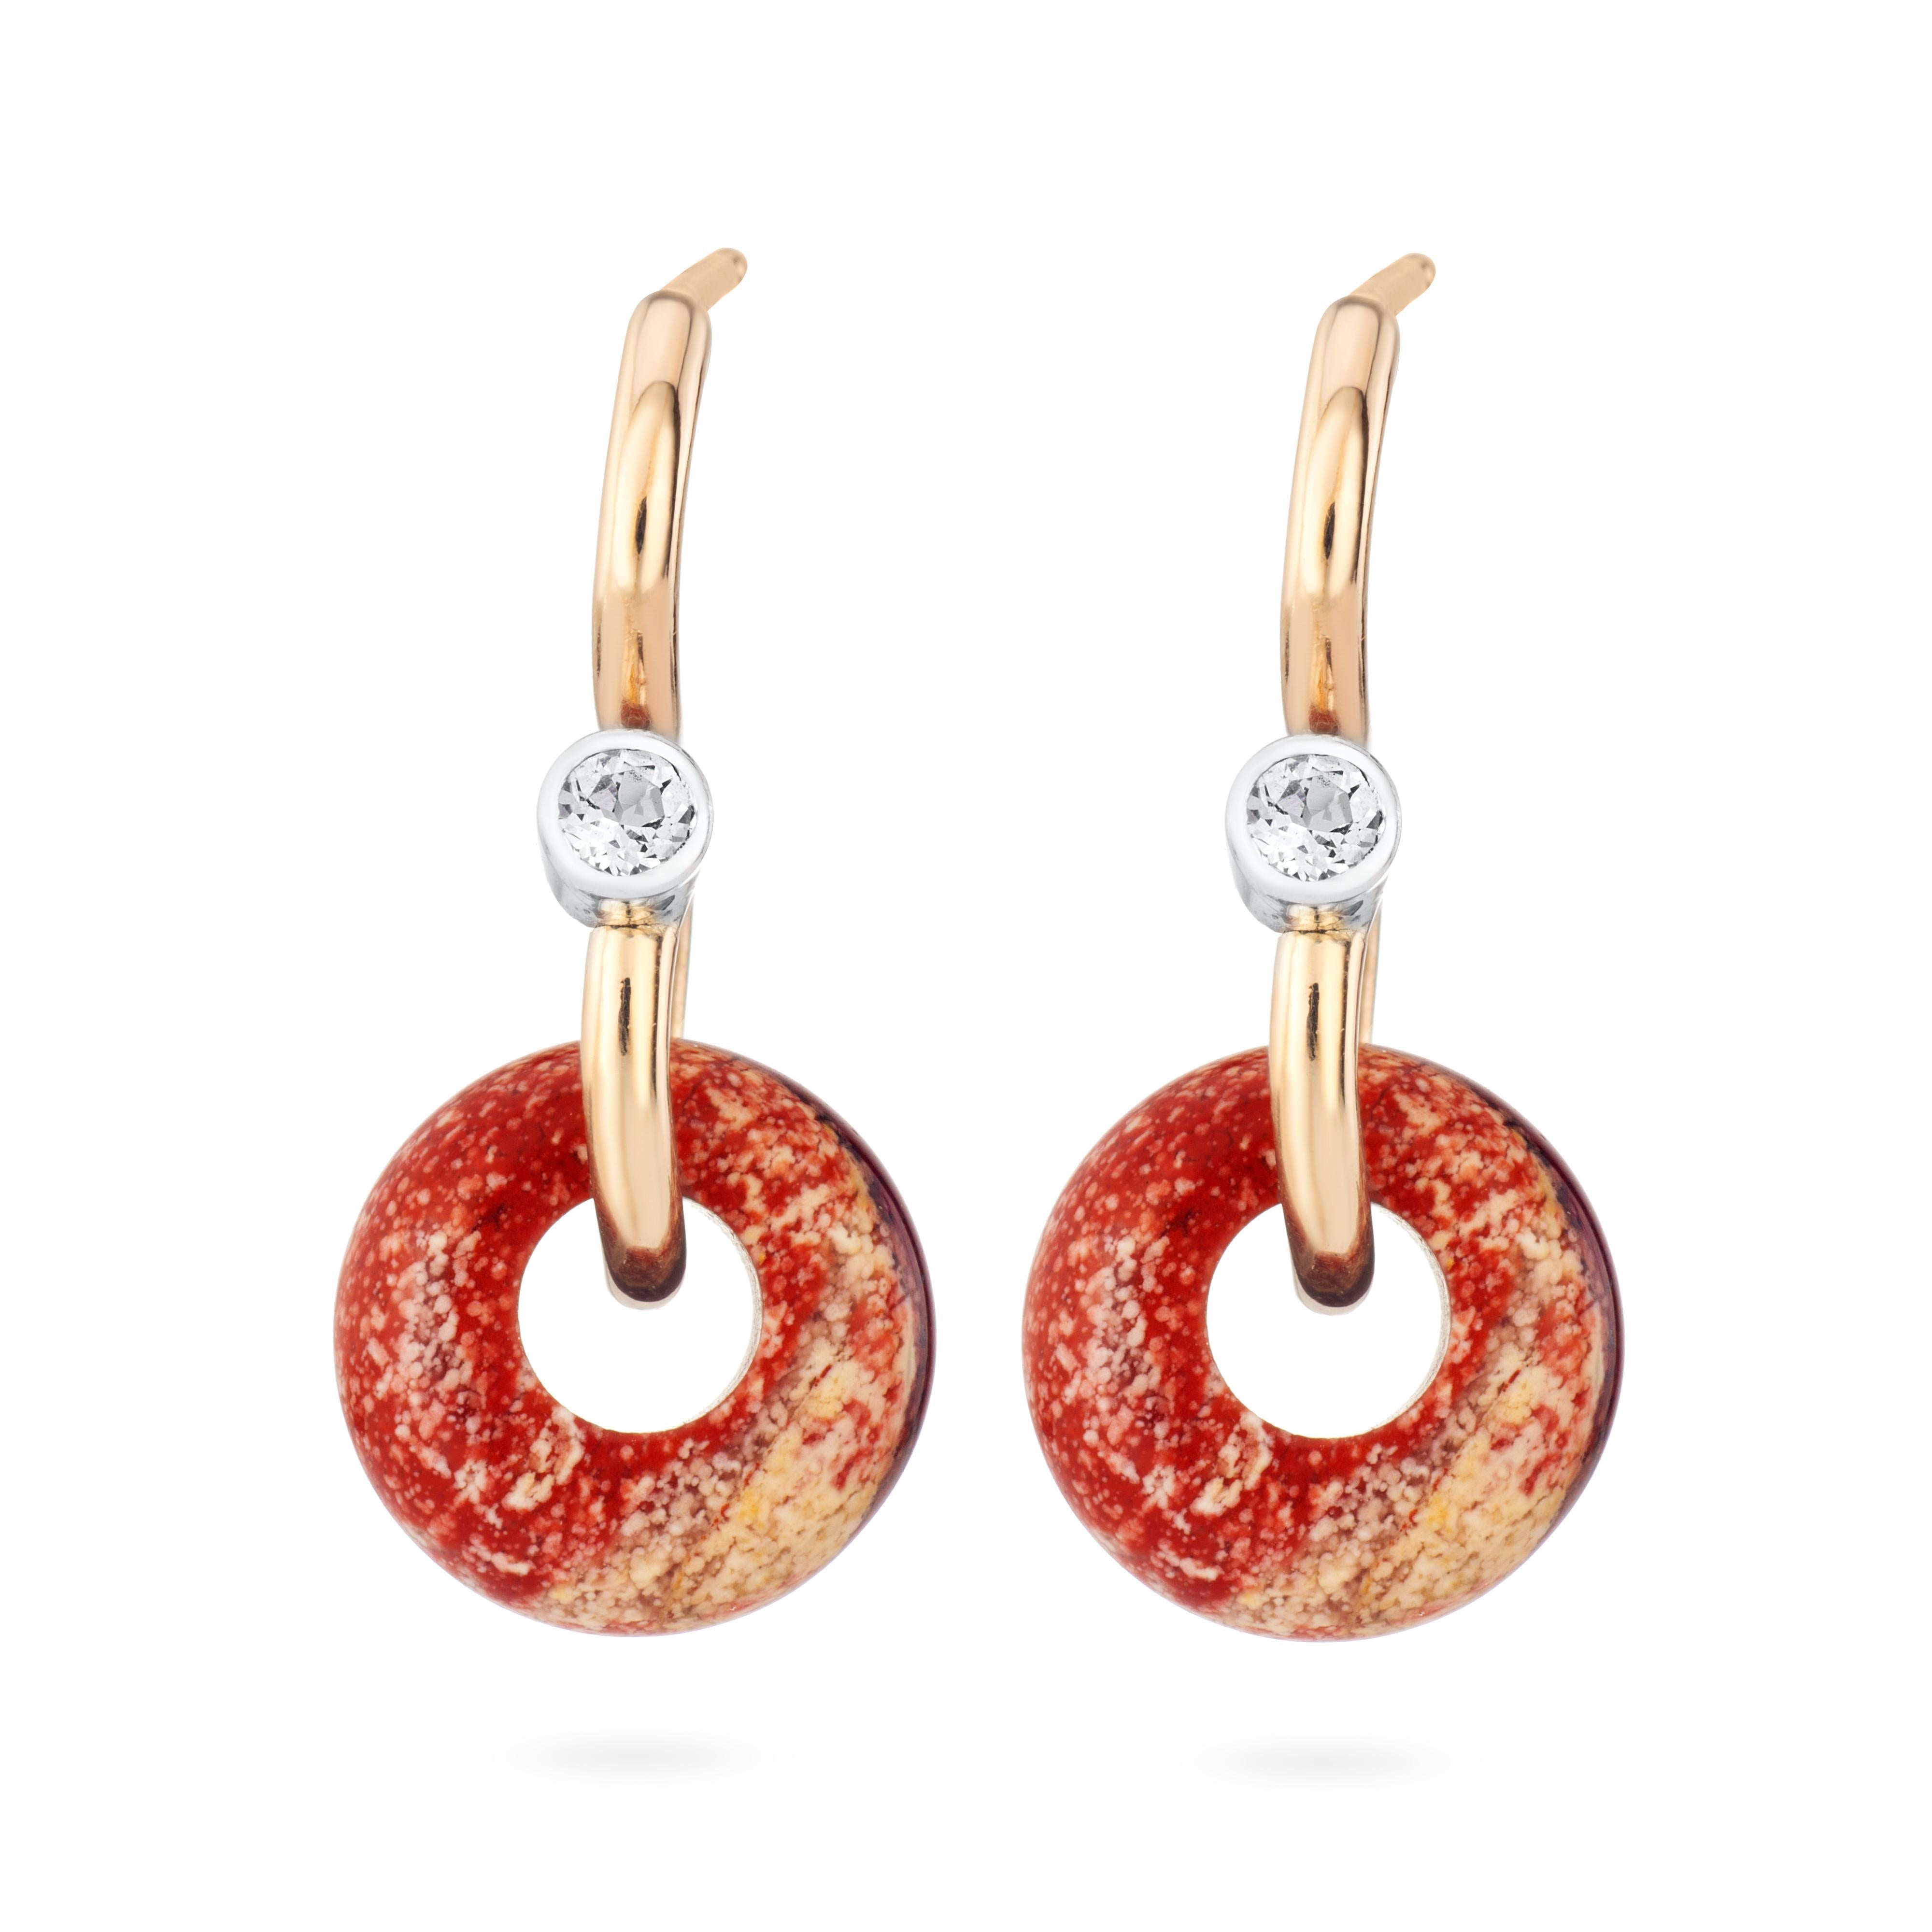 A miniature iteration of the signature poise earrings, an S shaped simple hook design incorporating red jasper and white sapphire gemstones.

Sapphire is known as the stone of wisdom and serenity, whilst red jasper is associated with grounding and